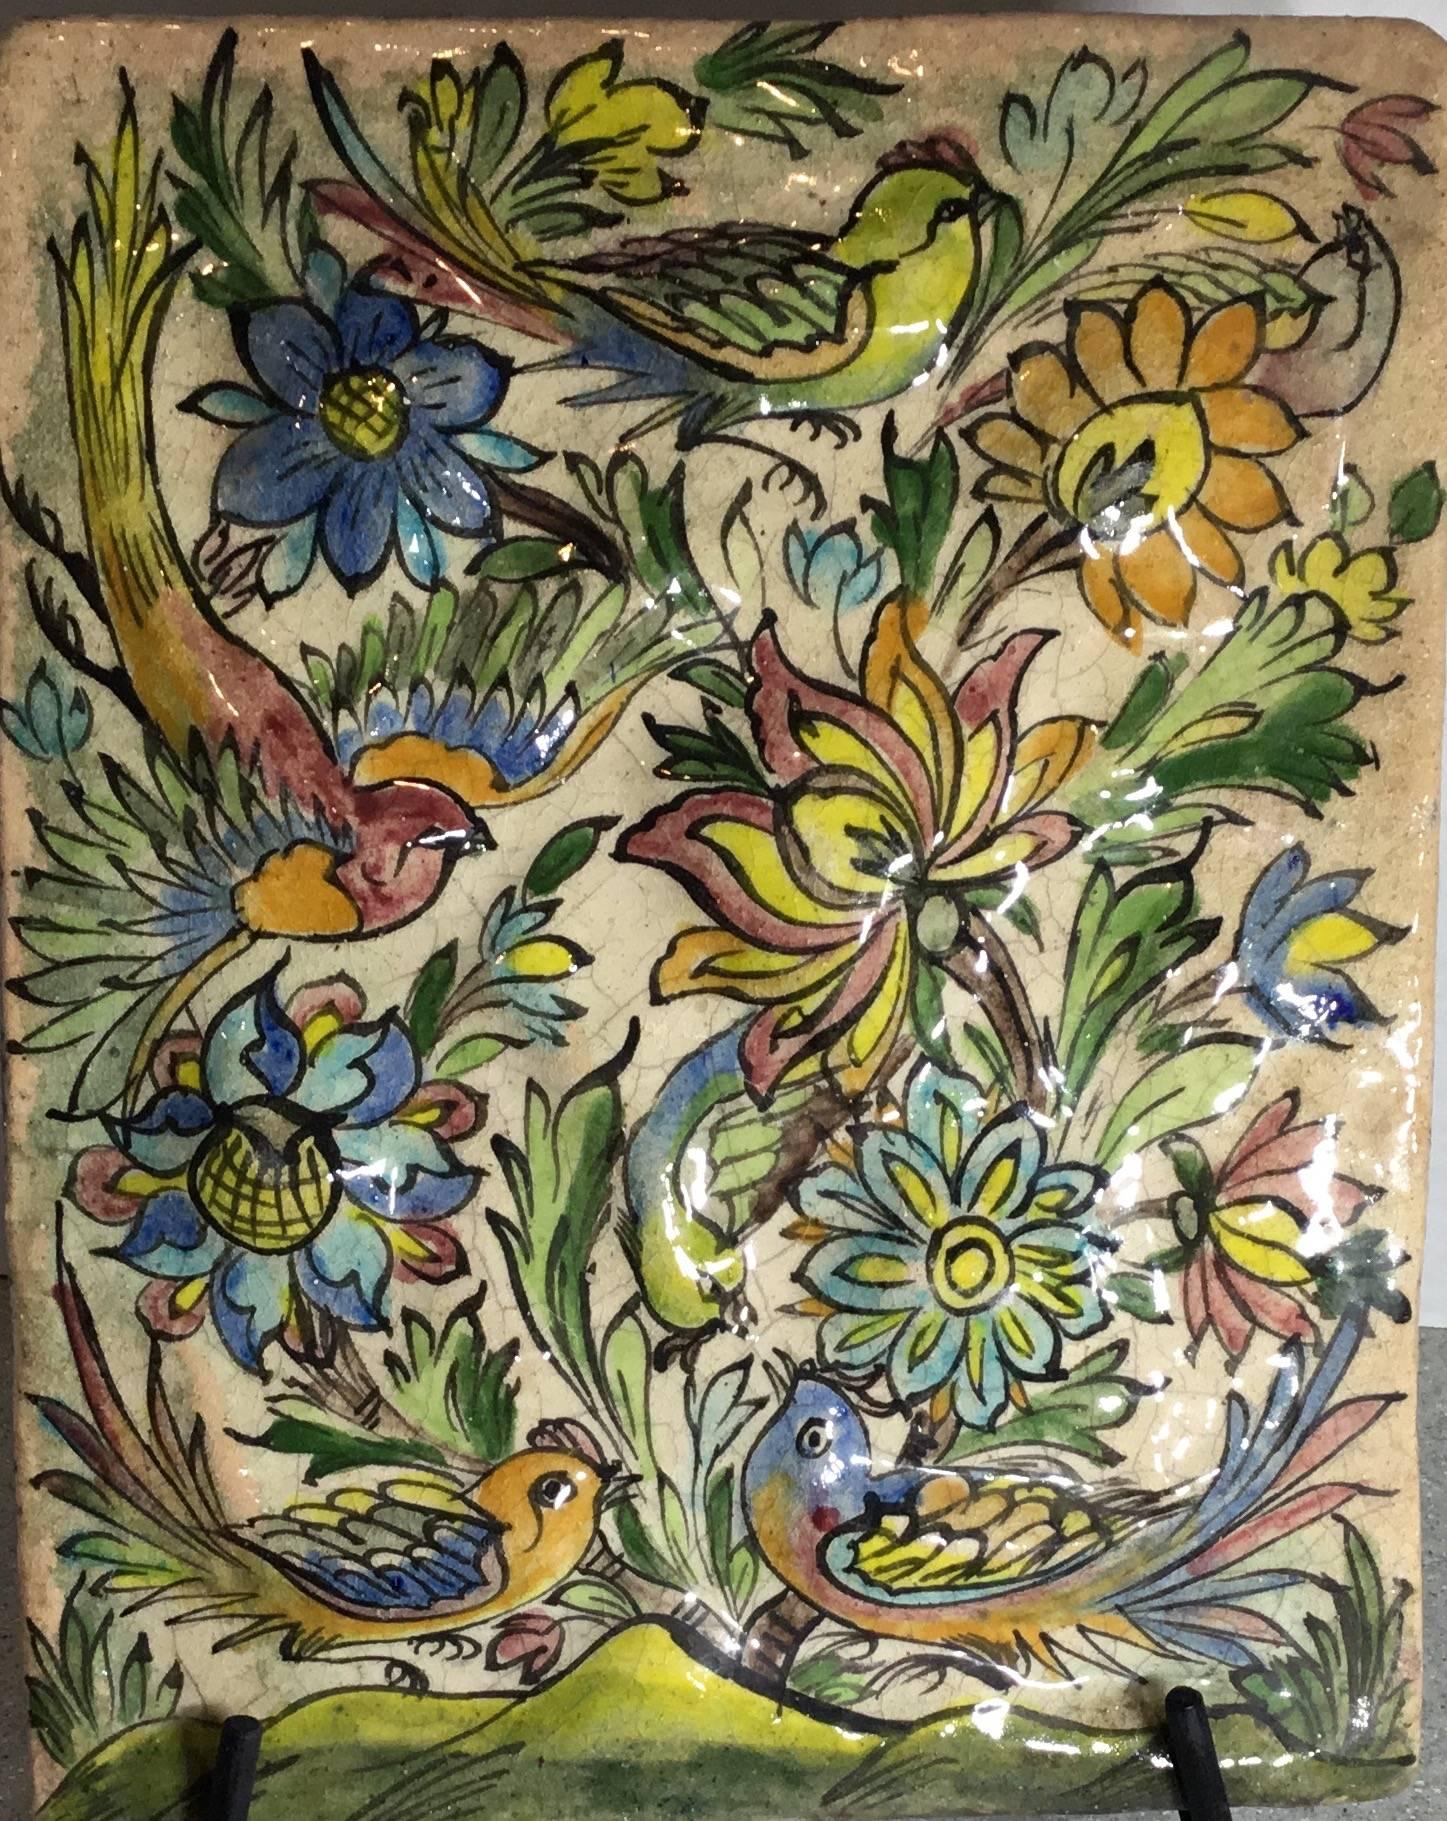 Exceptional Persian tile all hand-painted and glazed with beautiful scenery of birds flying between colorful vines and flowers on a cream color background.
Great decorative tile on display.
Functional steel display piece included.
     